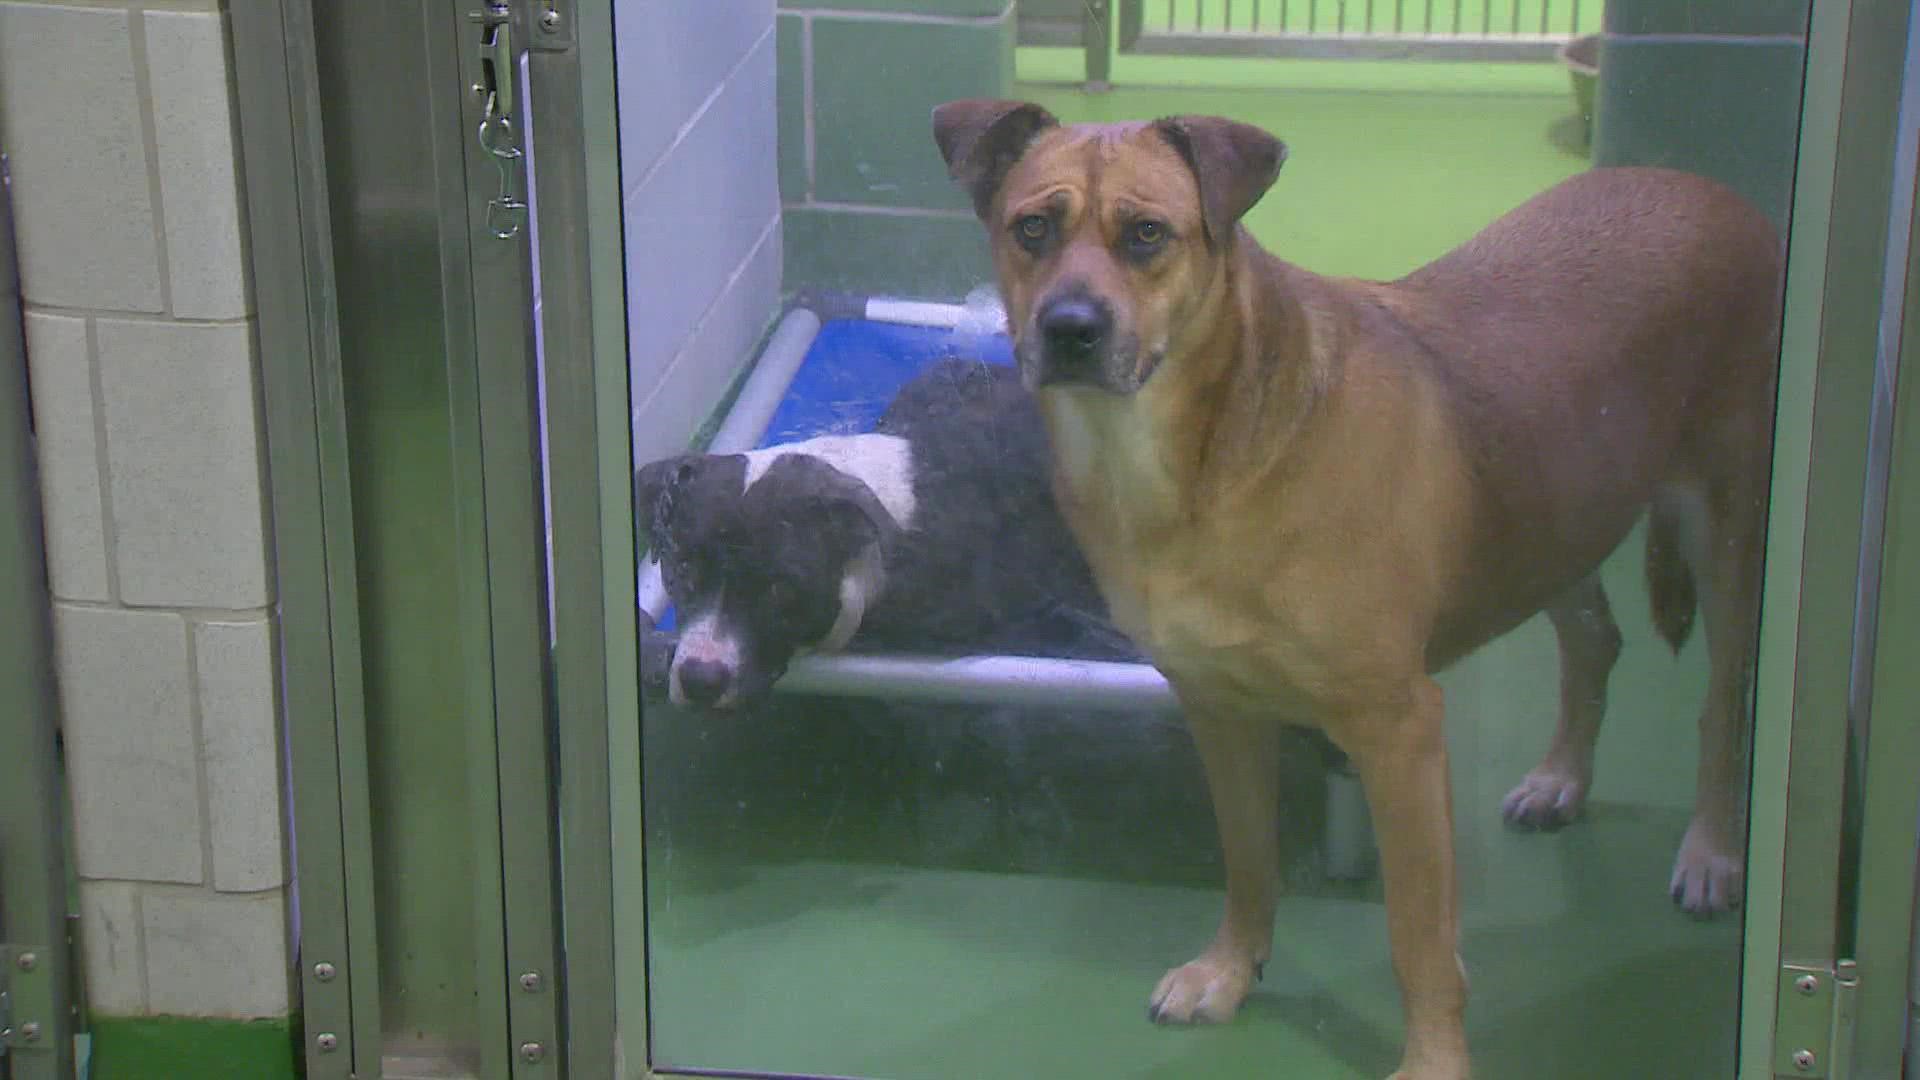 DAS is offering multiple incentives to encourage people to adopt a dog in need at their shelter.